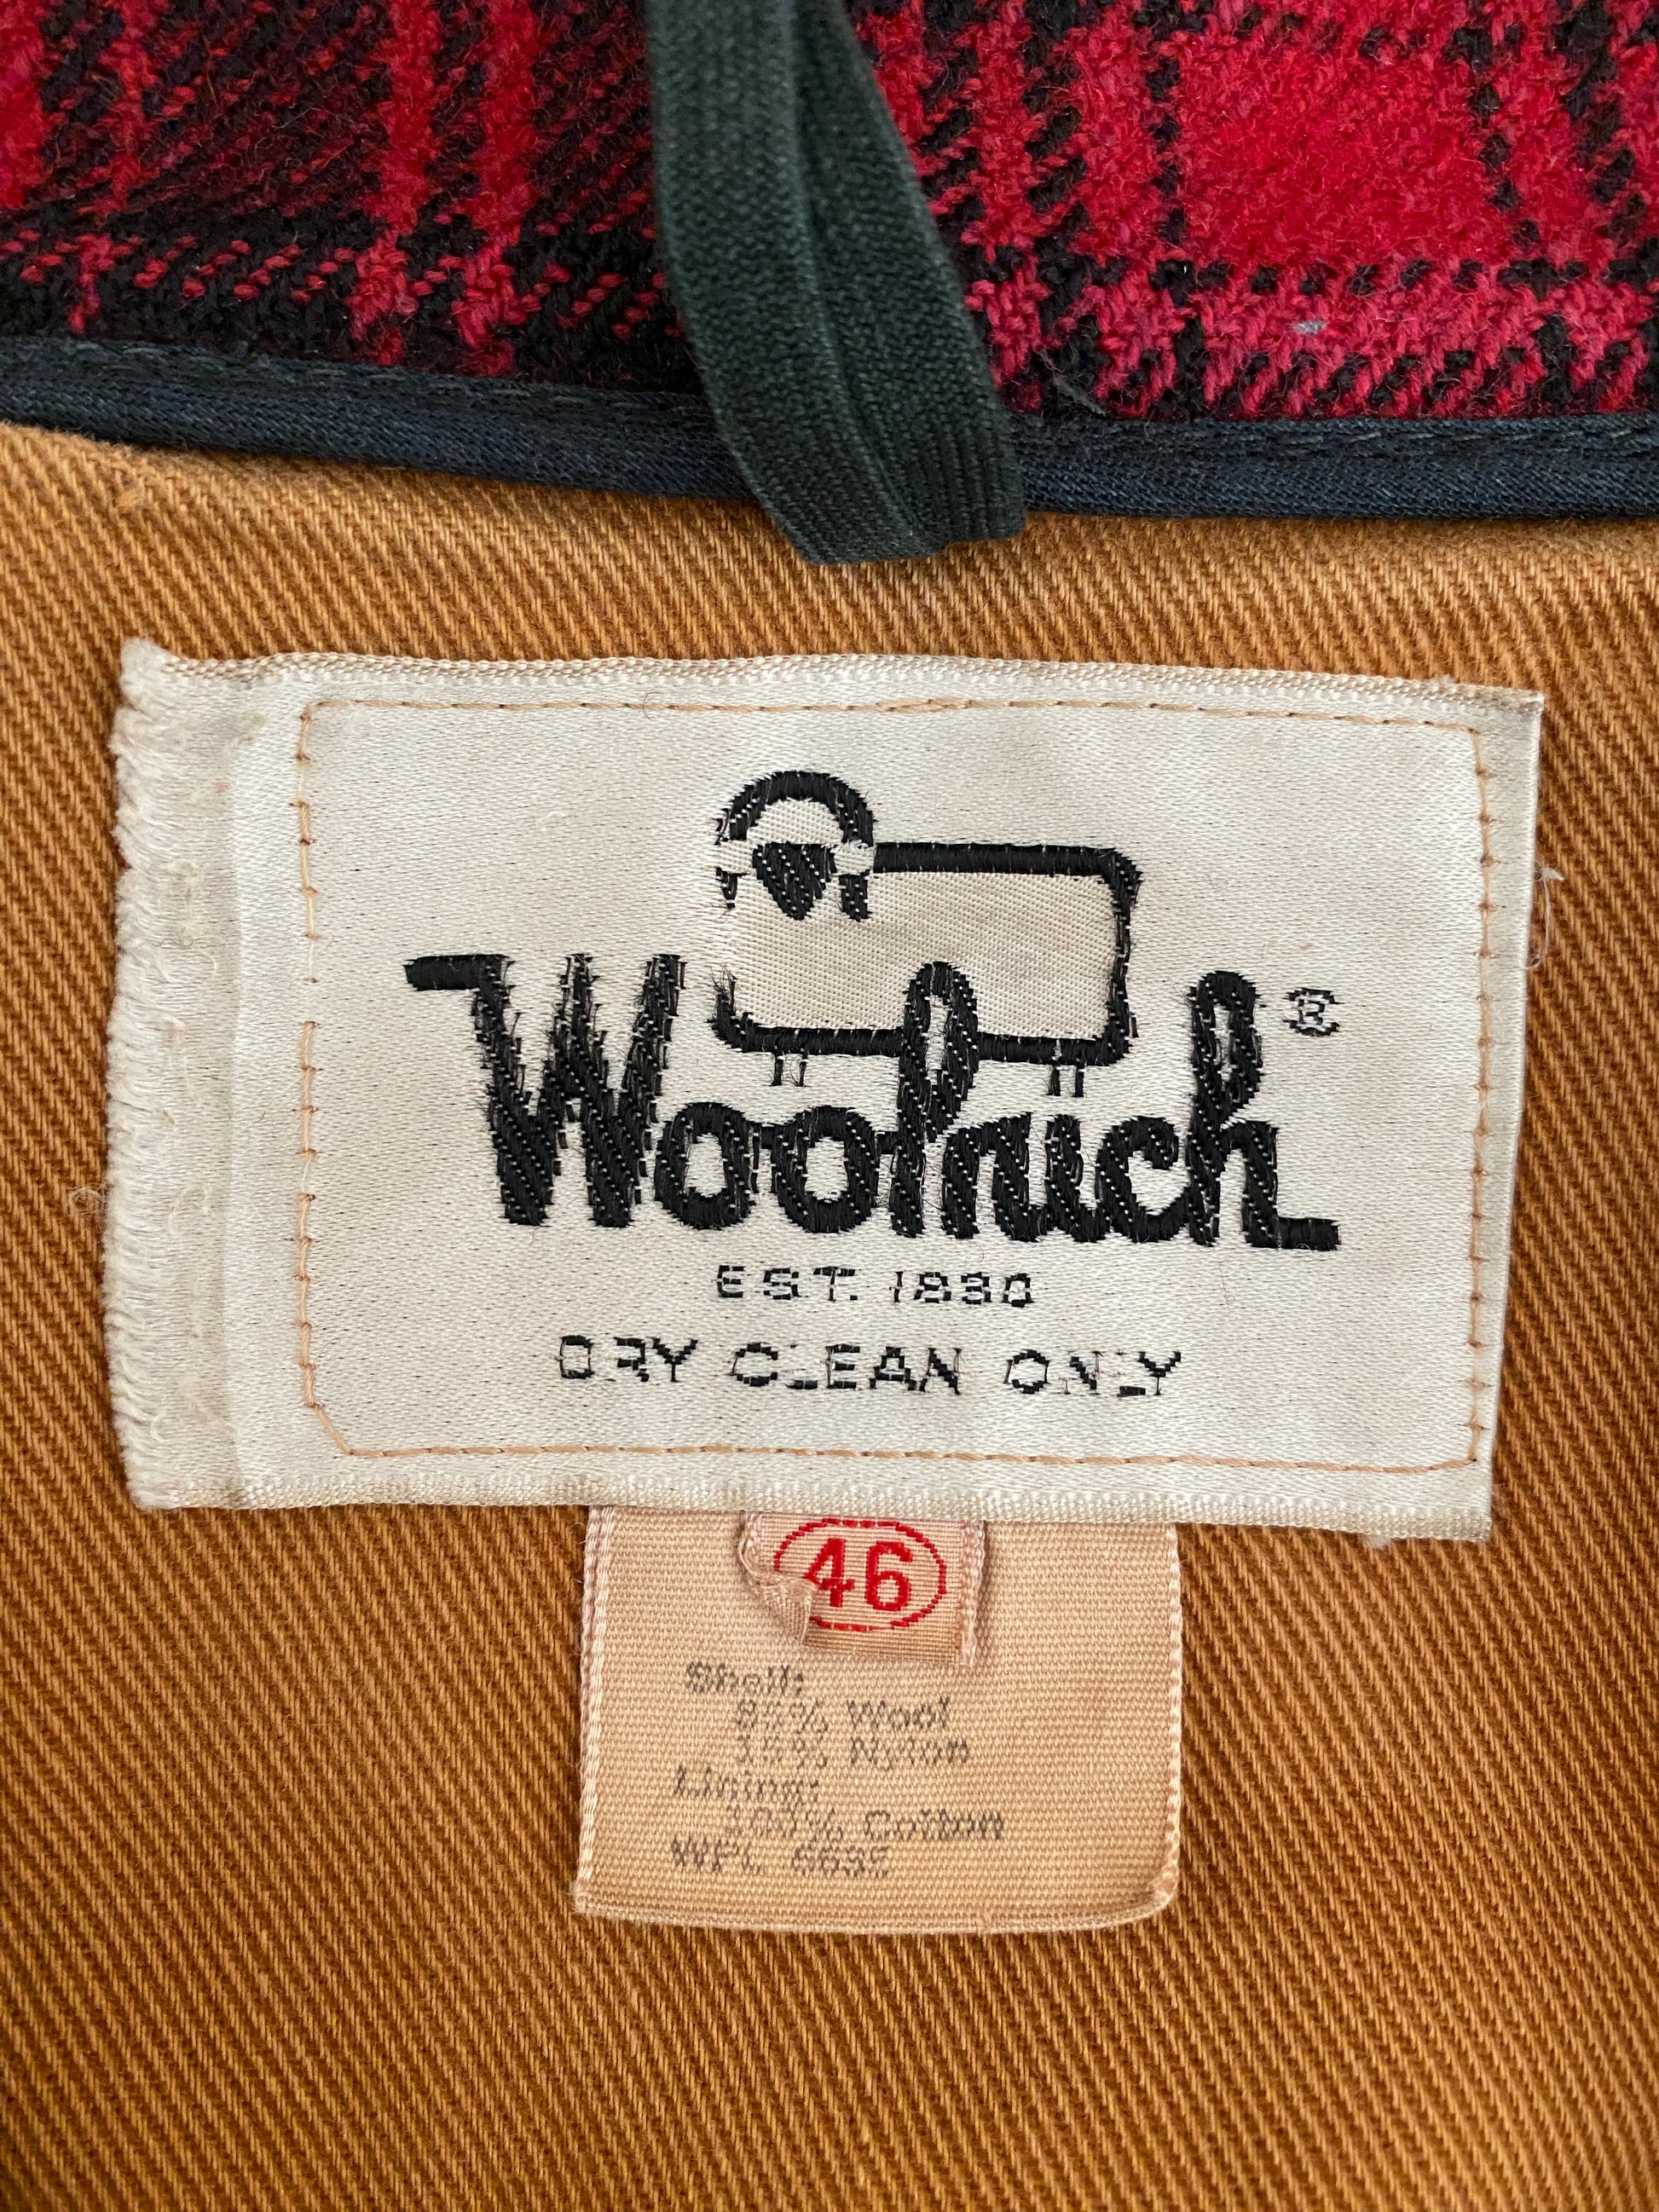 Vintage 60s Woolrich Plaid Wool Hunting Jacket Size 46 (56 Euro) | Classic Outdoor Apparel